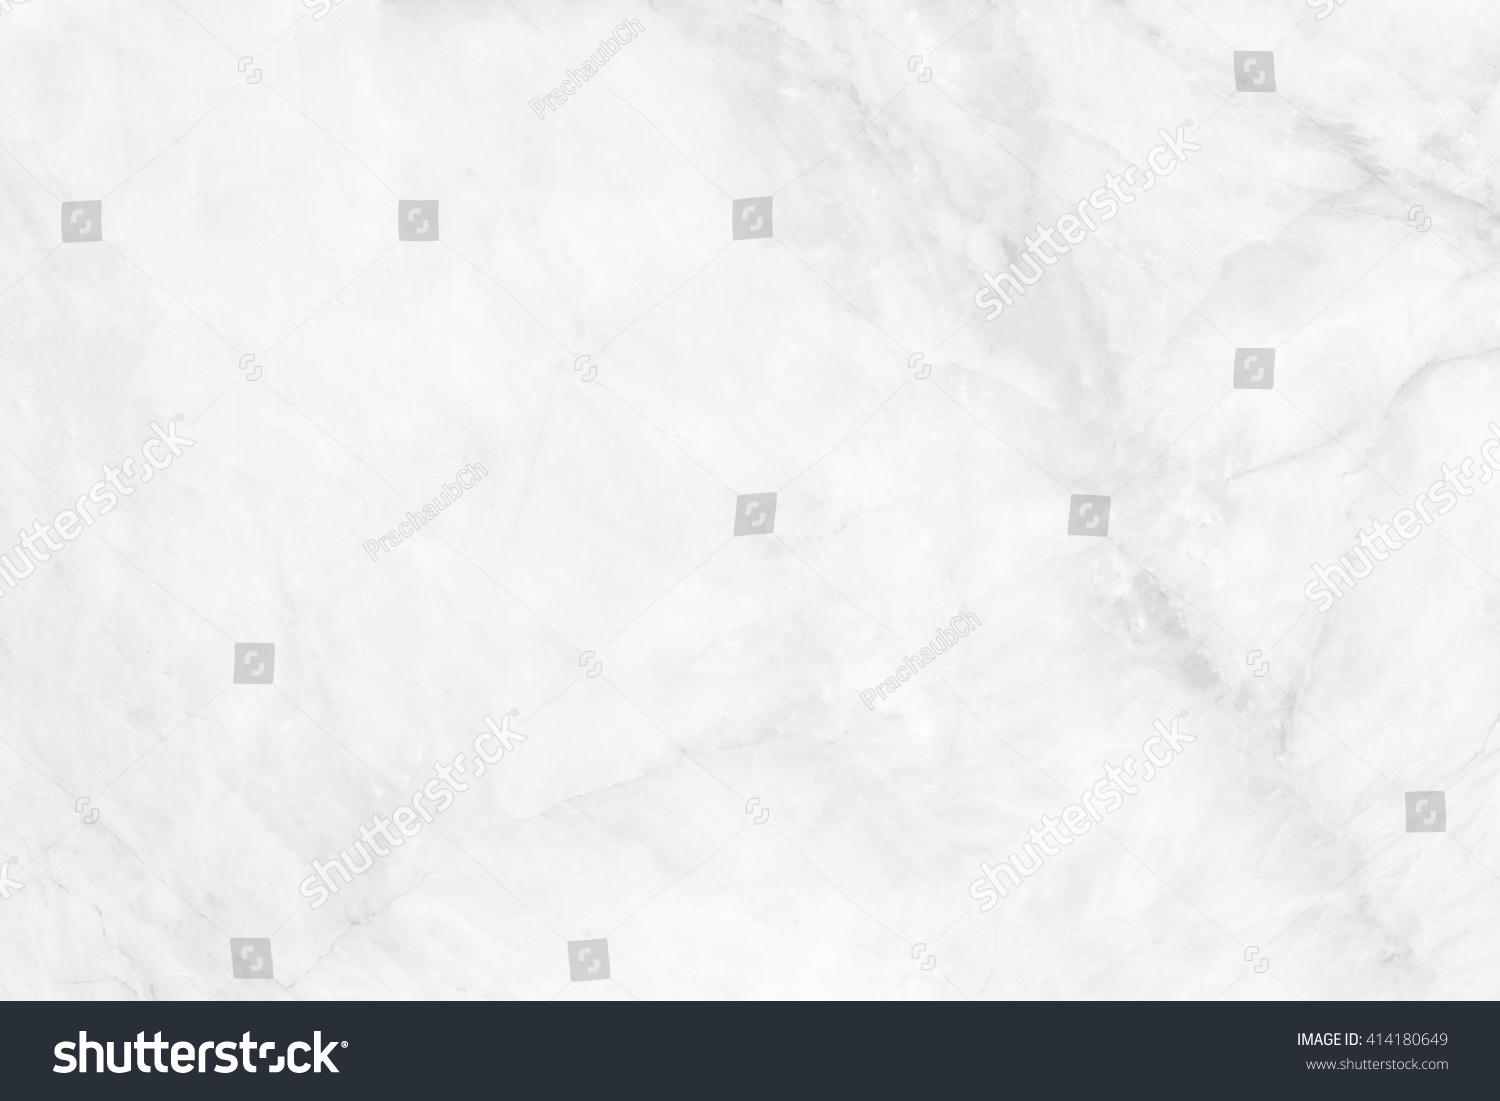 White marble texture background, abstract texture for design #414180649